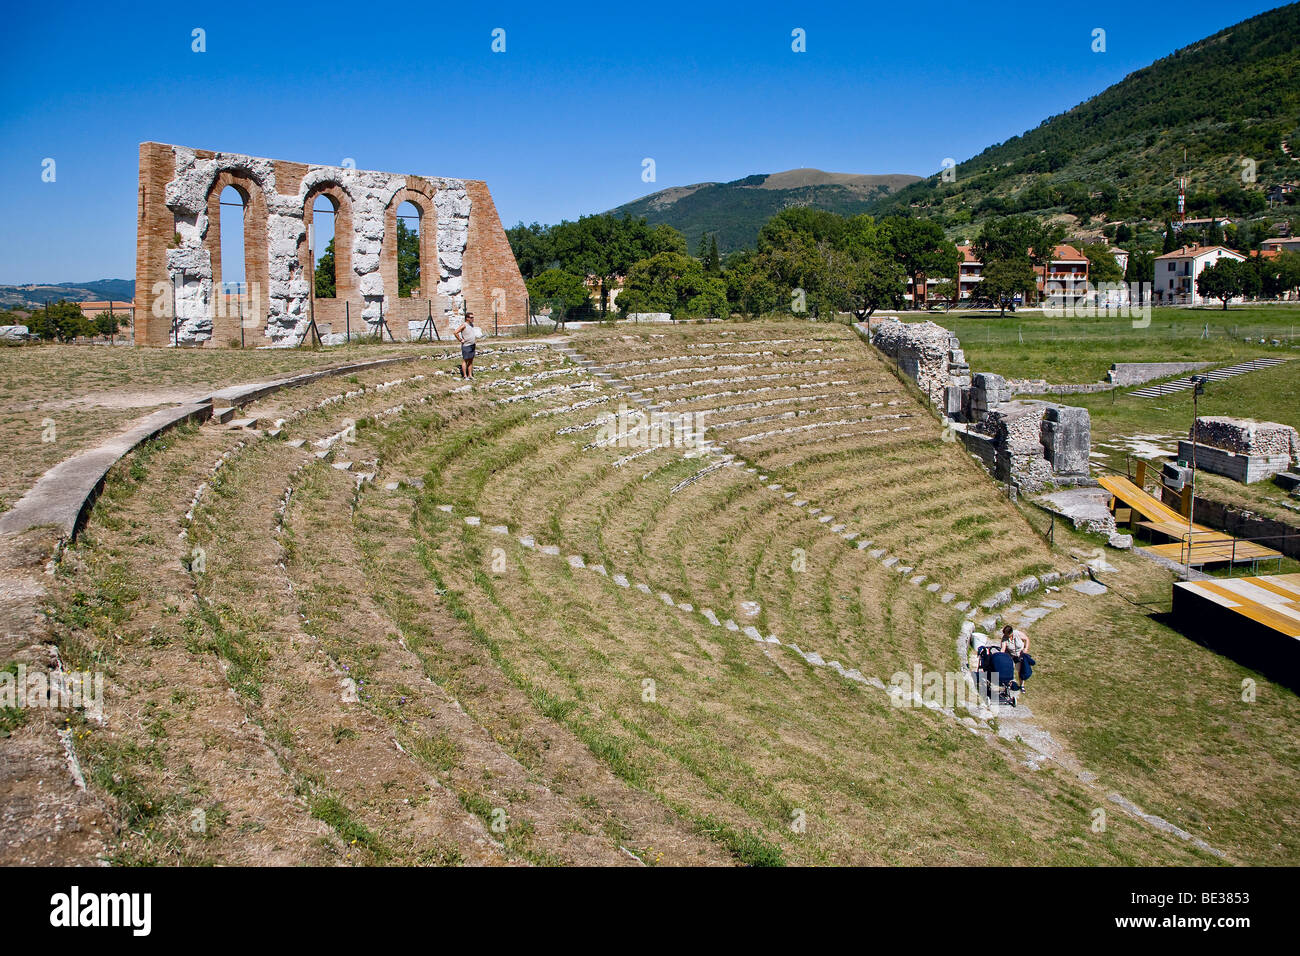 The amphitheatre in the medieval town Gubbio in Umbria, Italy, Europe Stock Photo